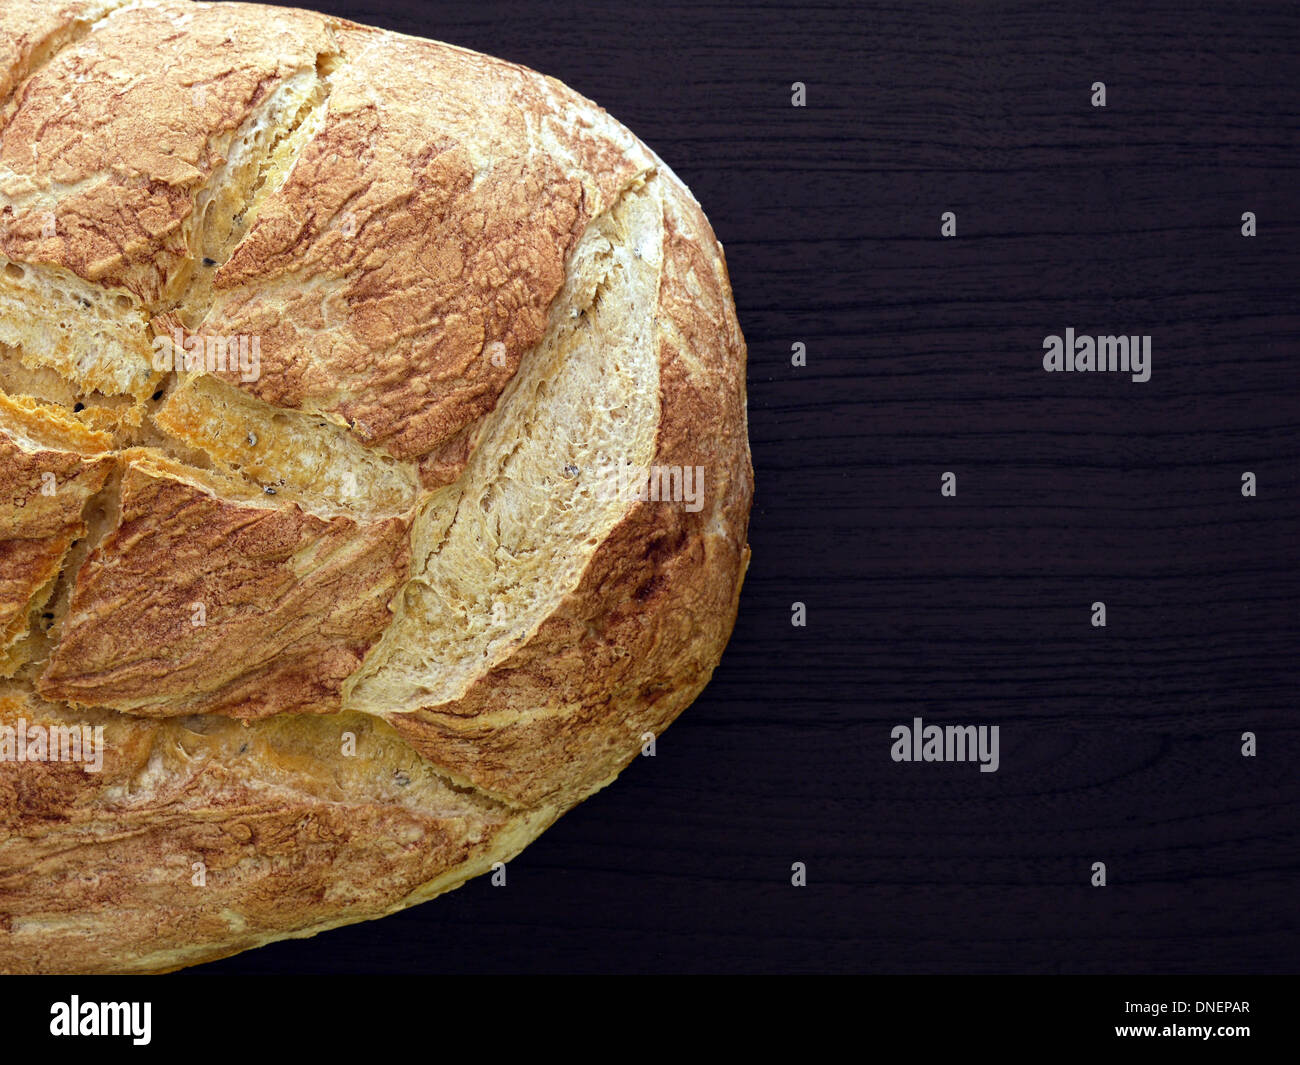 Loaf of home baked bread on dark brown wooden surface shot from above Stock Photo